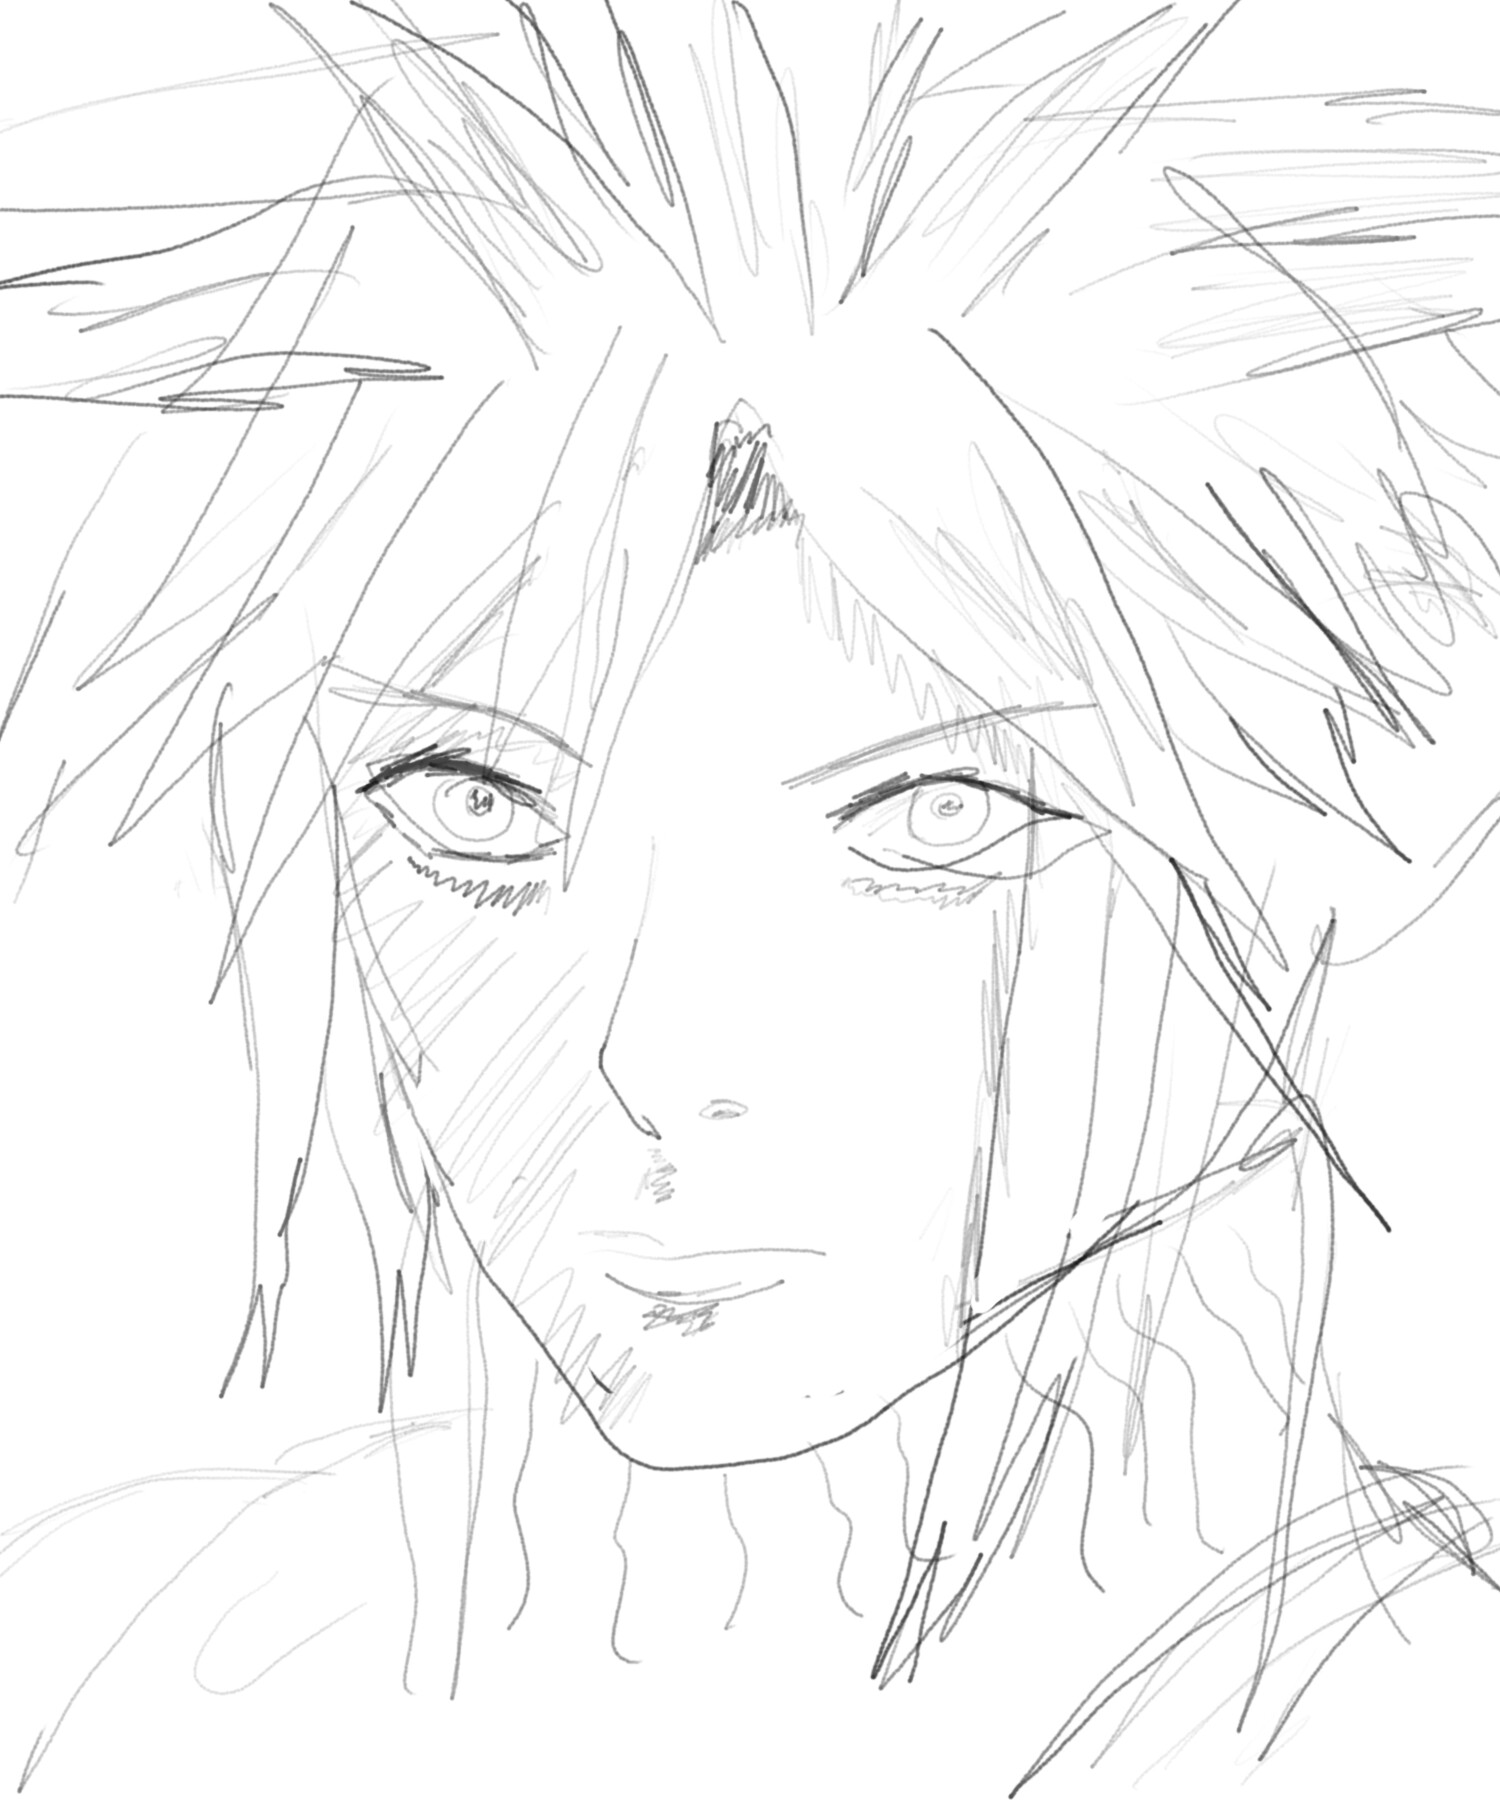 Final Fantasy - Cloud Sketch by rodiontigue on DeviantArt